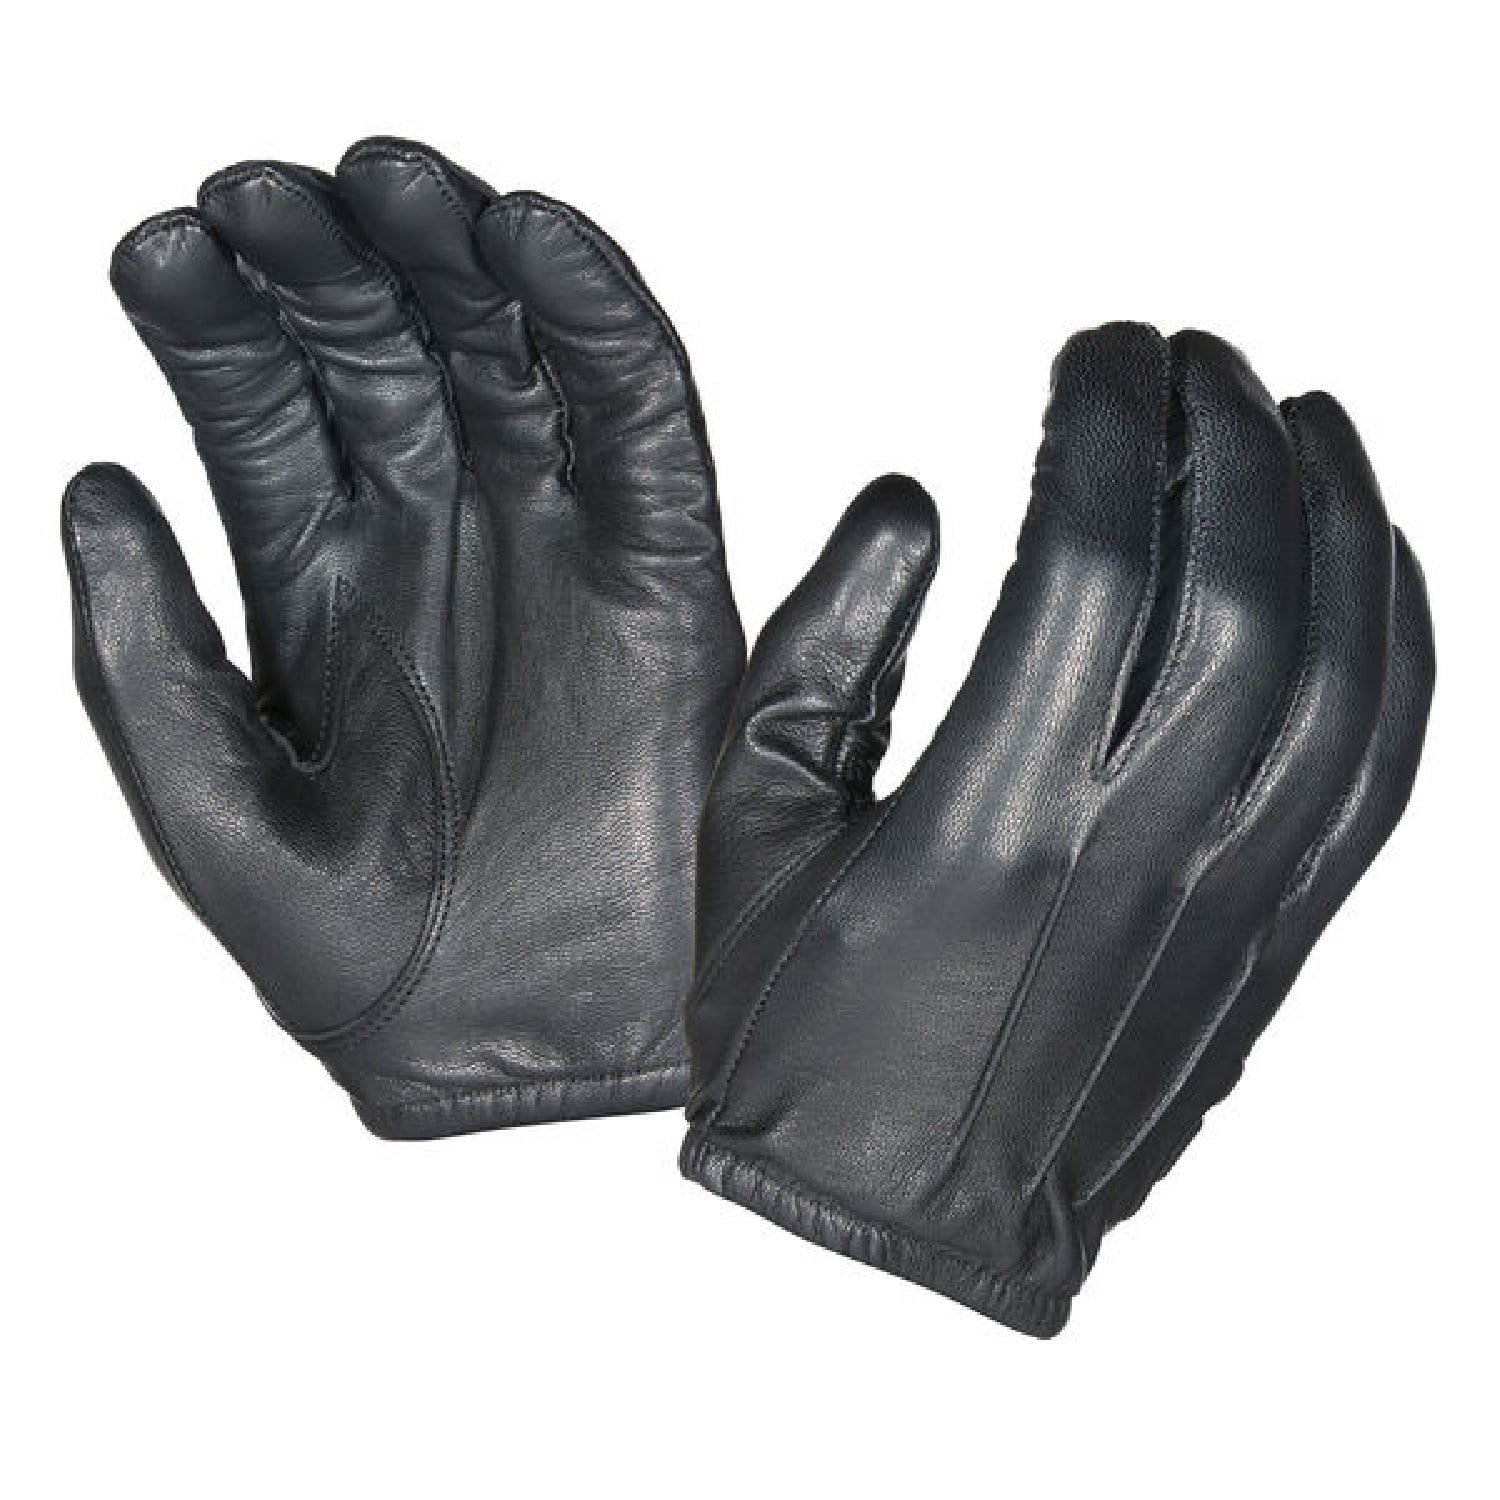 Hatch RFK300 Cut-Resistant Glove made with Kevlar Size Large 